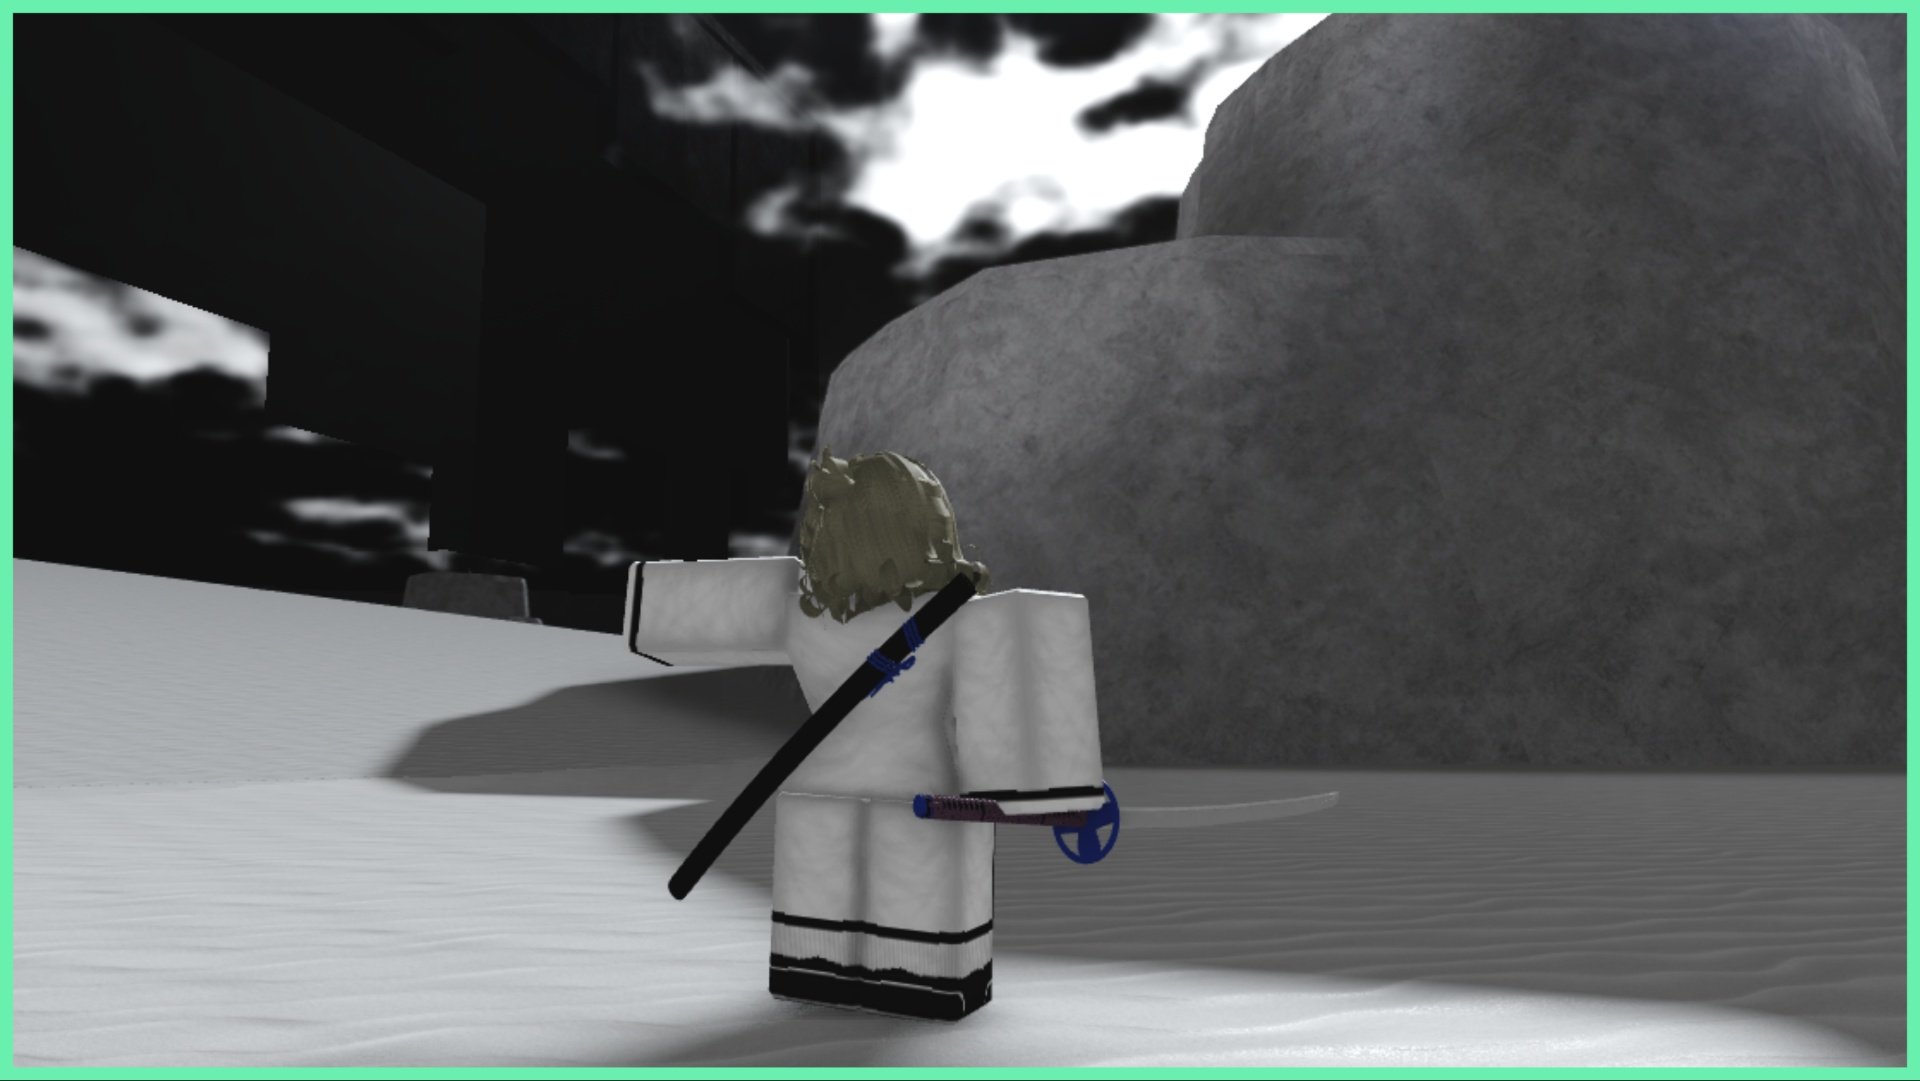 Feature image for our Type Soul Black Flash Guide which shows an arrancar player in Hueco Mundo wearing all white and pointing into the distance. In the free hand is a katana held neutrally with no ill intent